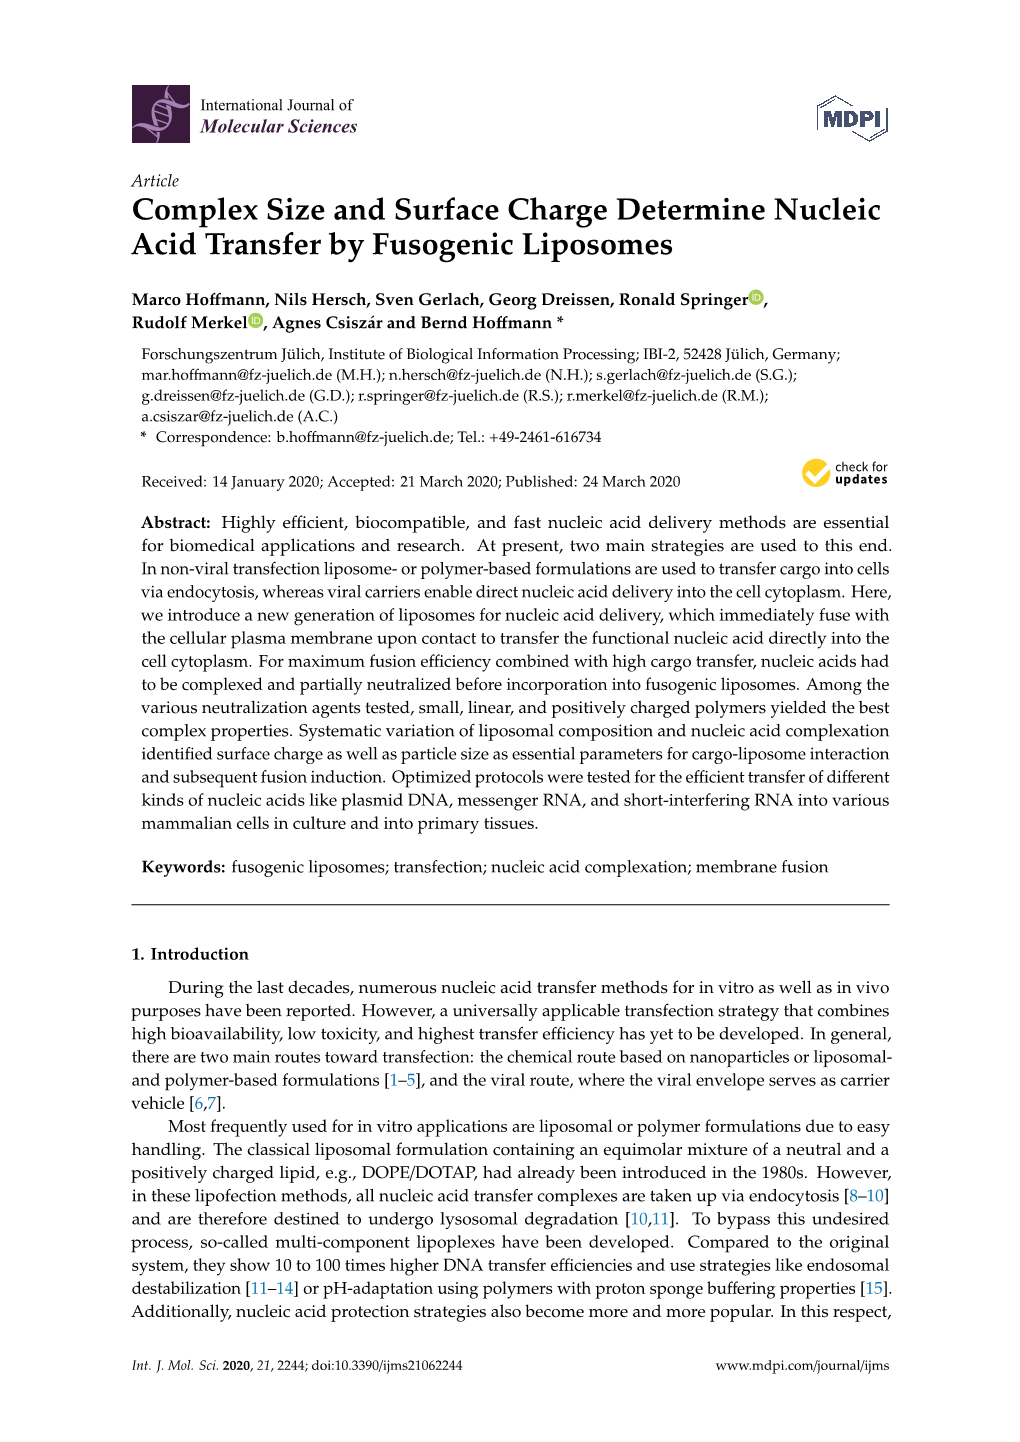 Complex Size and Surface Charge Determine Nucleic Acid Transfer by Fusogenic Liposomes